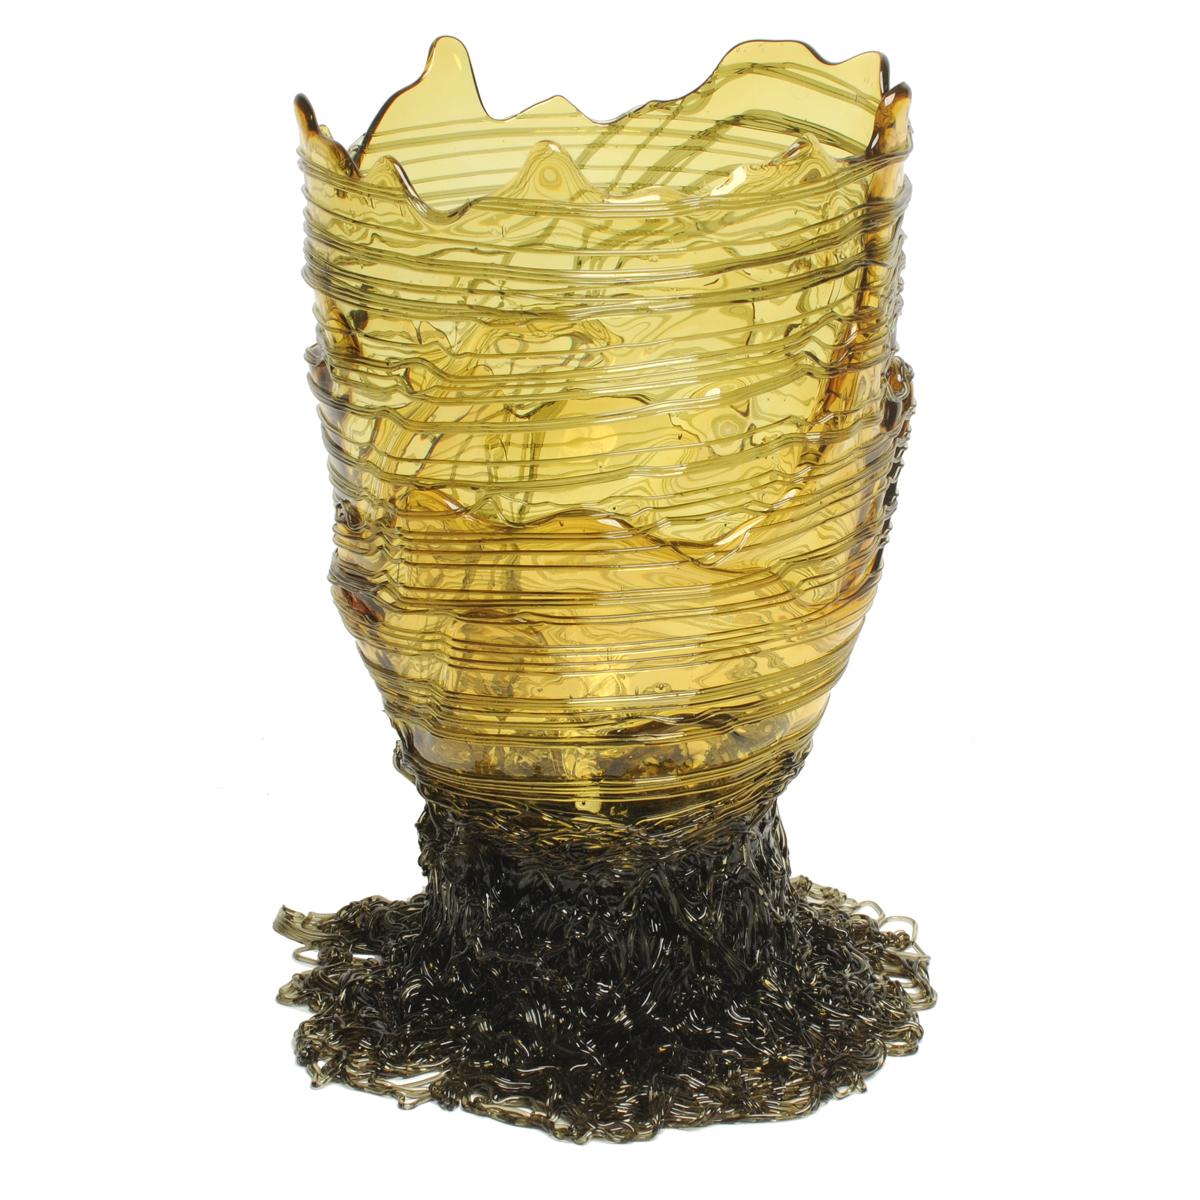 Spaghetti vase, grey, yellow.

Vase in soft resin designed by Gaetano Pesce in 1995 for Fish Design collection.

Measures: XL ø 30cm x H 56cm

Other sizes available.

Colours: Grey, yellow.
Vase in soft resin designed by Gaetano Pesce in